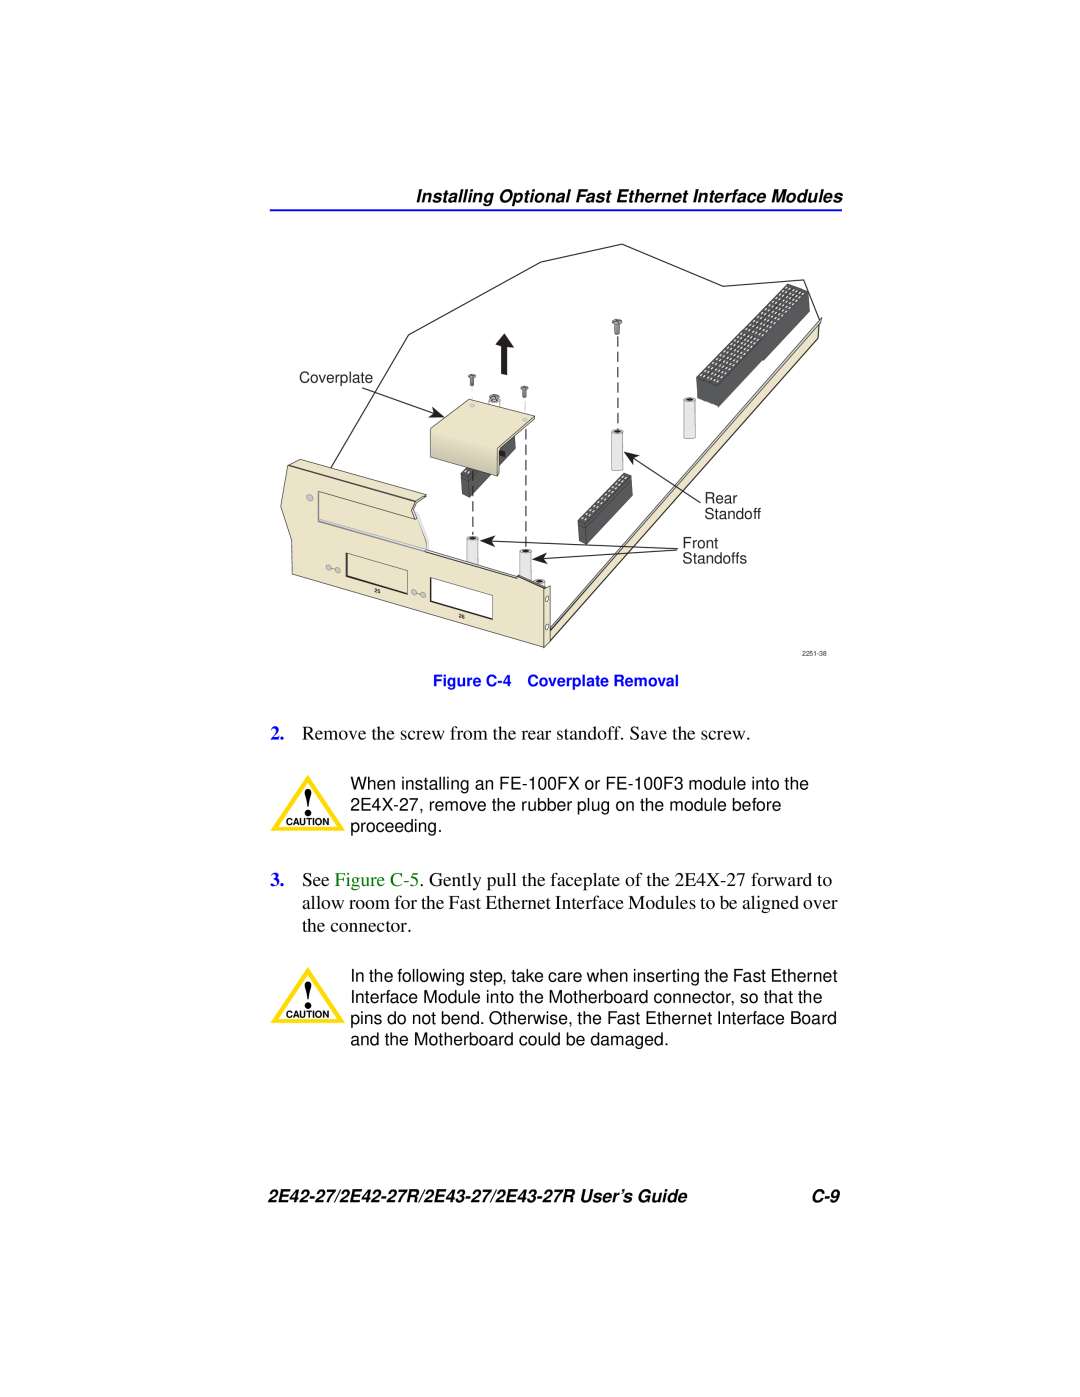 Cabletron Systems 2E43-27R, 2E42-27R manual Remove the screw from the rear standoff. Save the screw 